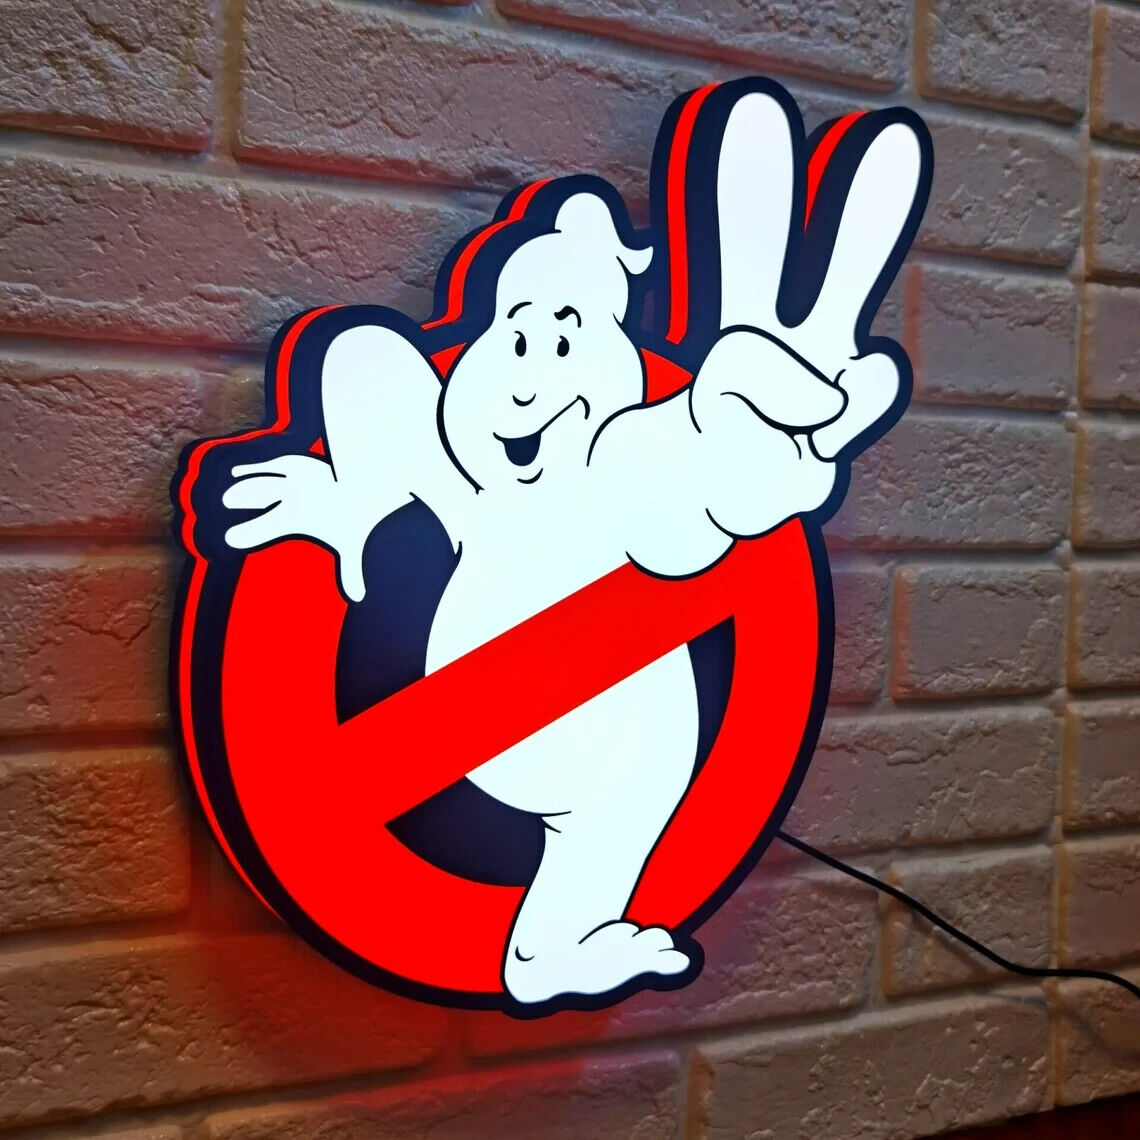 Ghostbusters 2 Logo Lightbox USB Powered with Dimming Control Perfect Decor